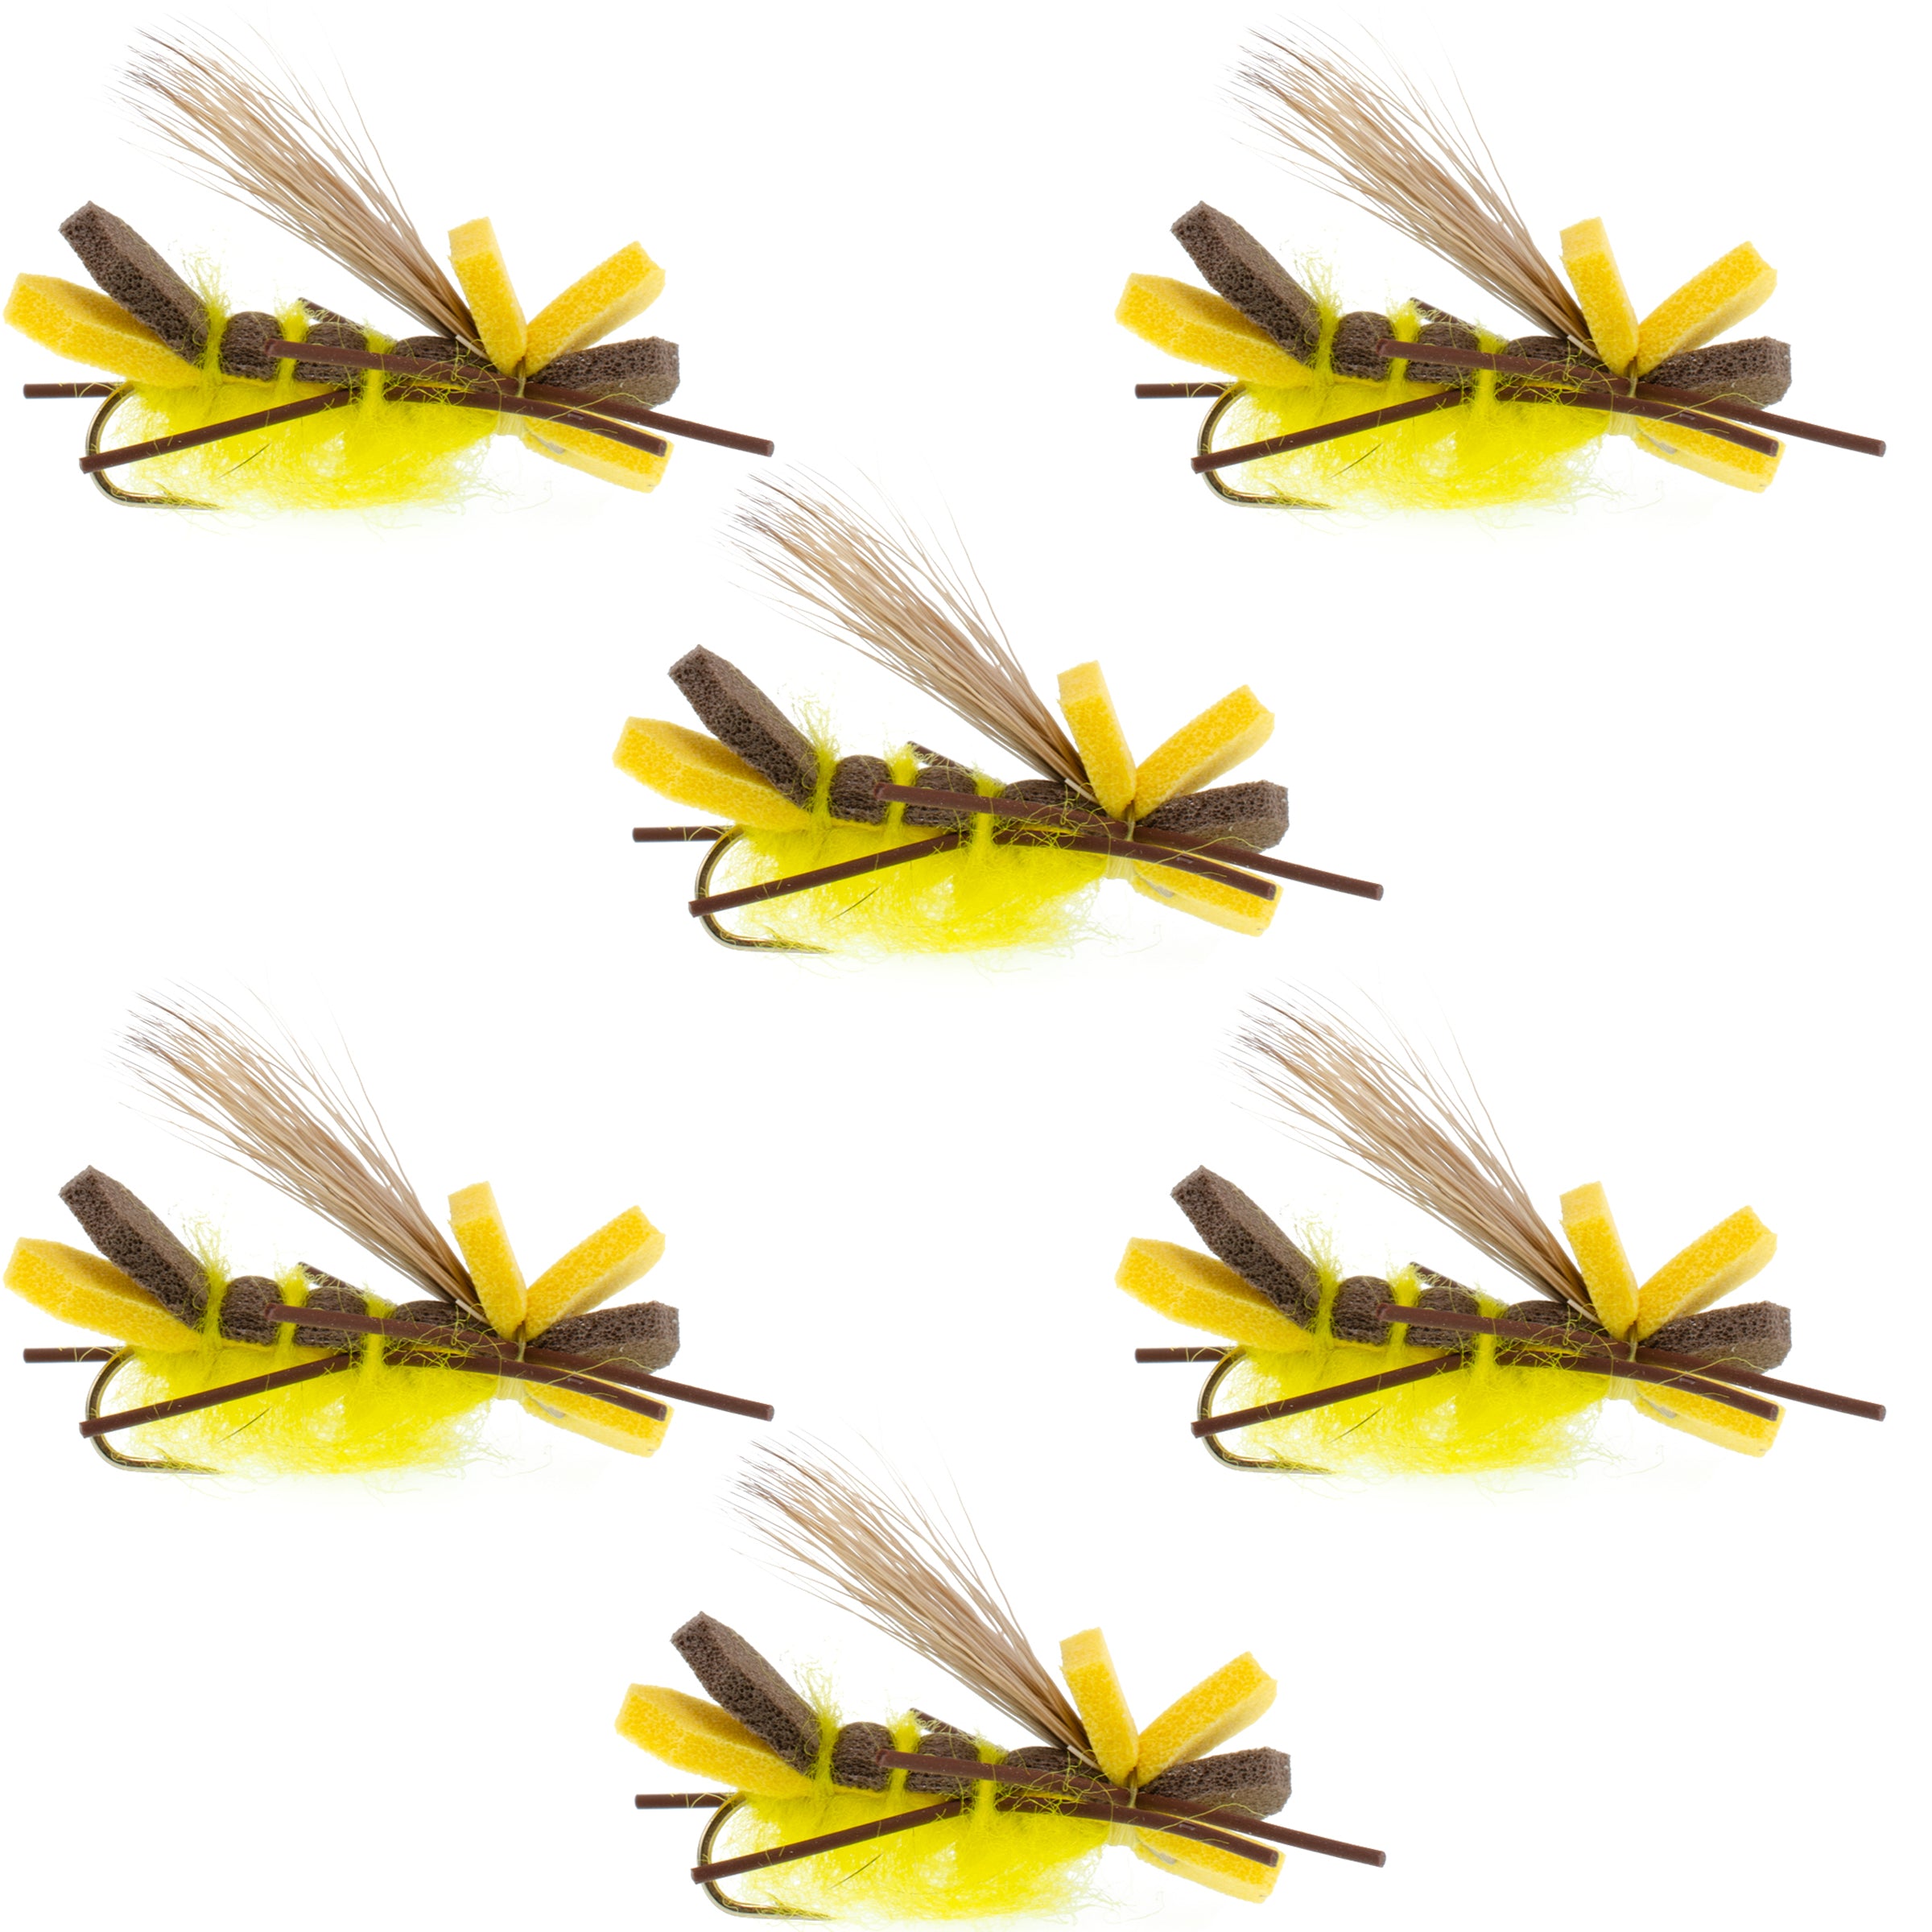 Godzilla Hopper Trout Flies - Yellow High Visibility Grasshopper or Stonefly Dry Fly - 6 Flies Hook Size 10